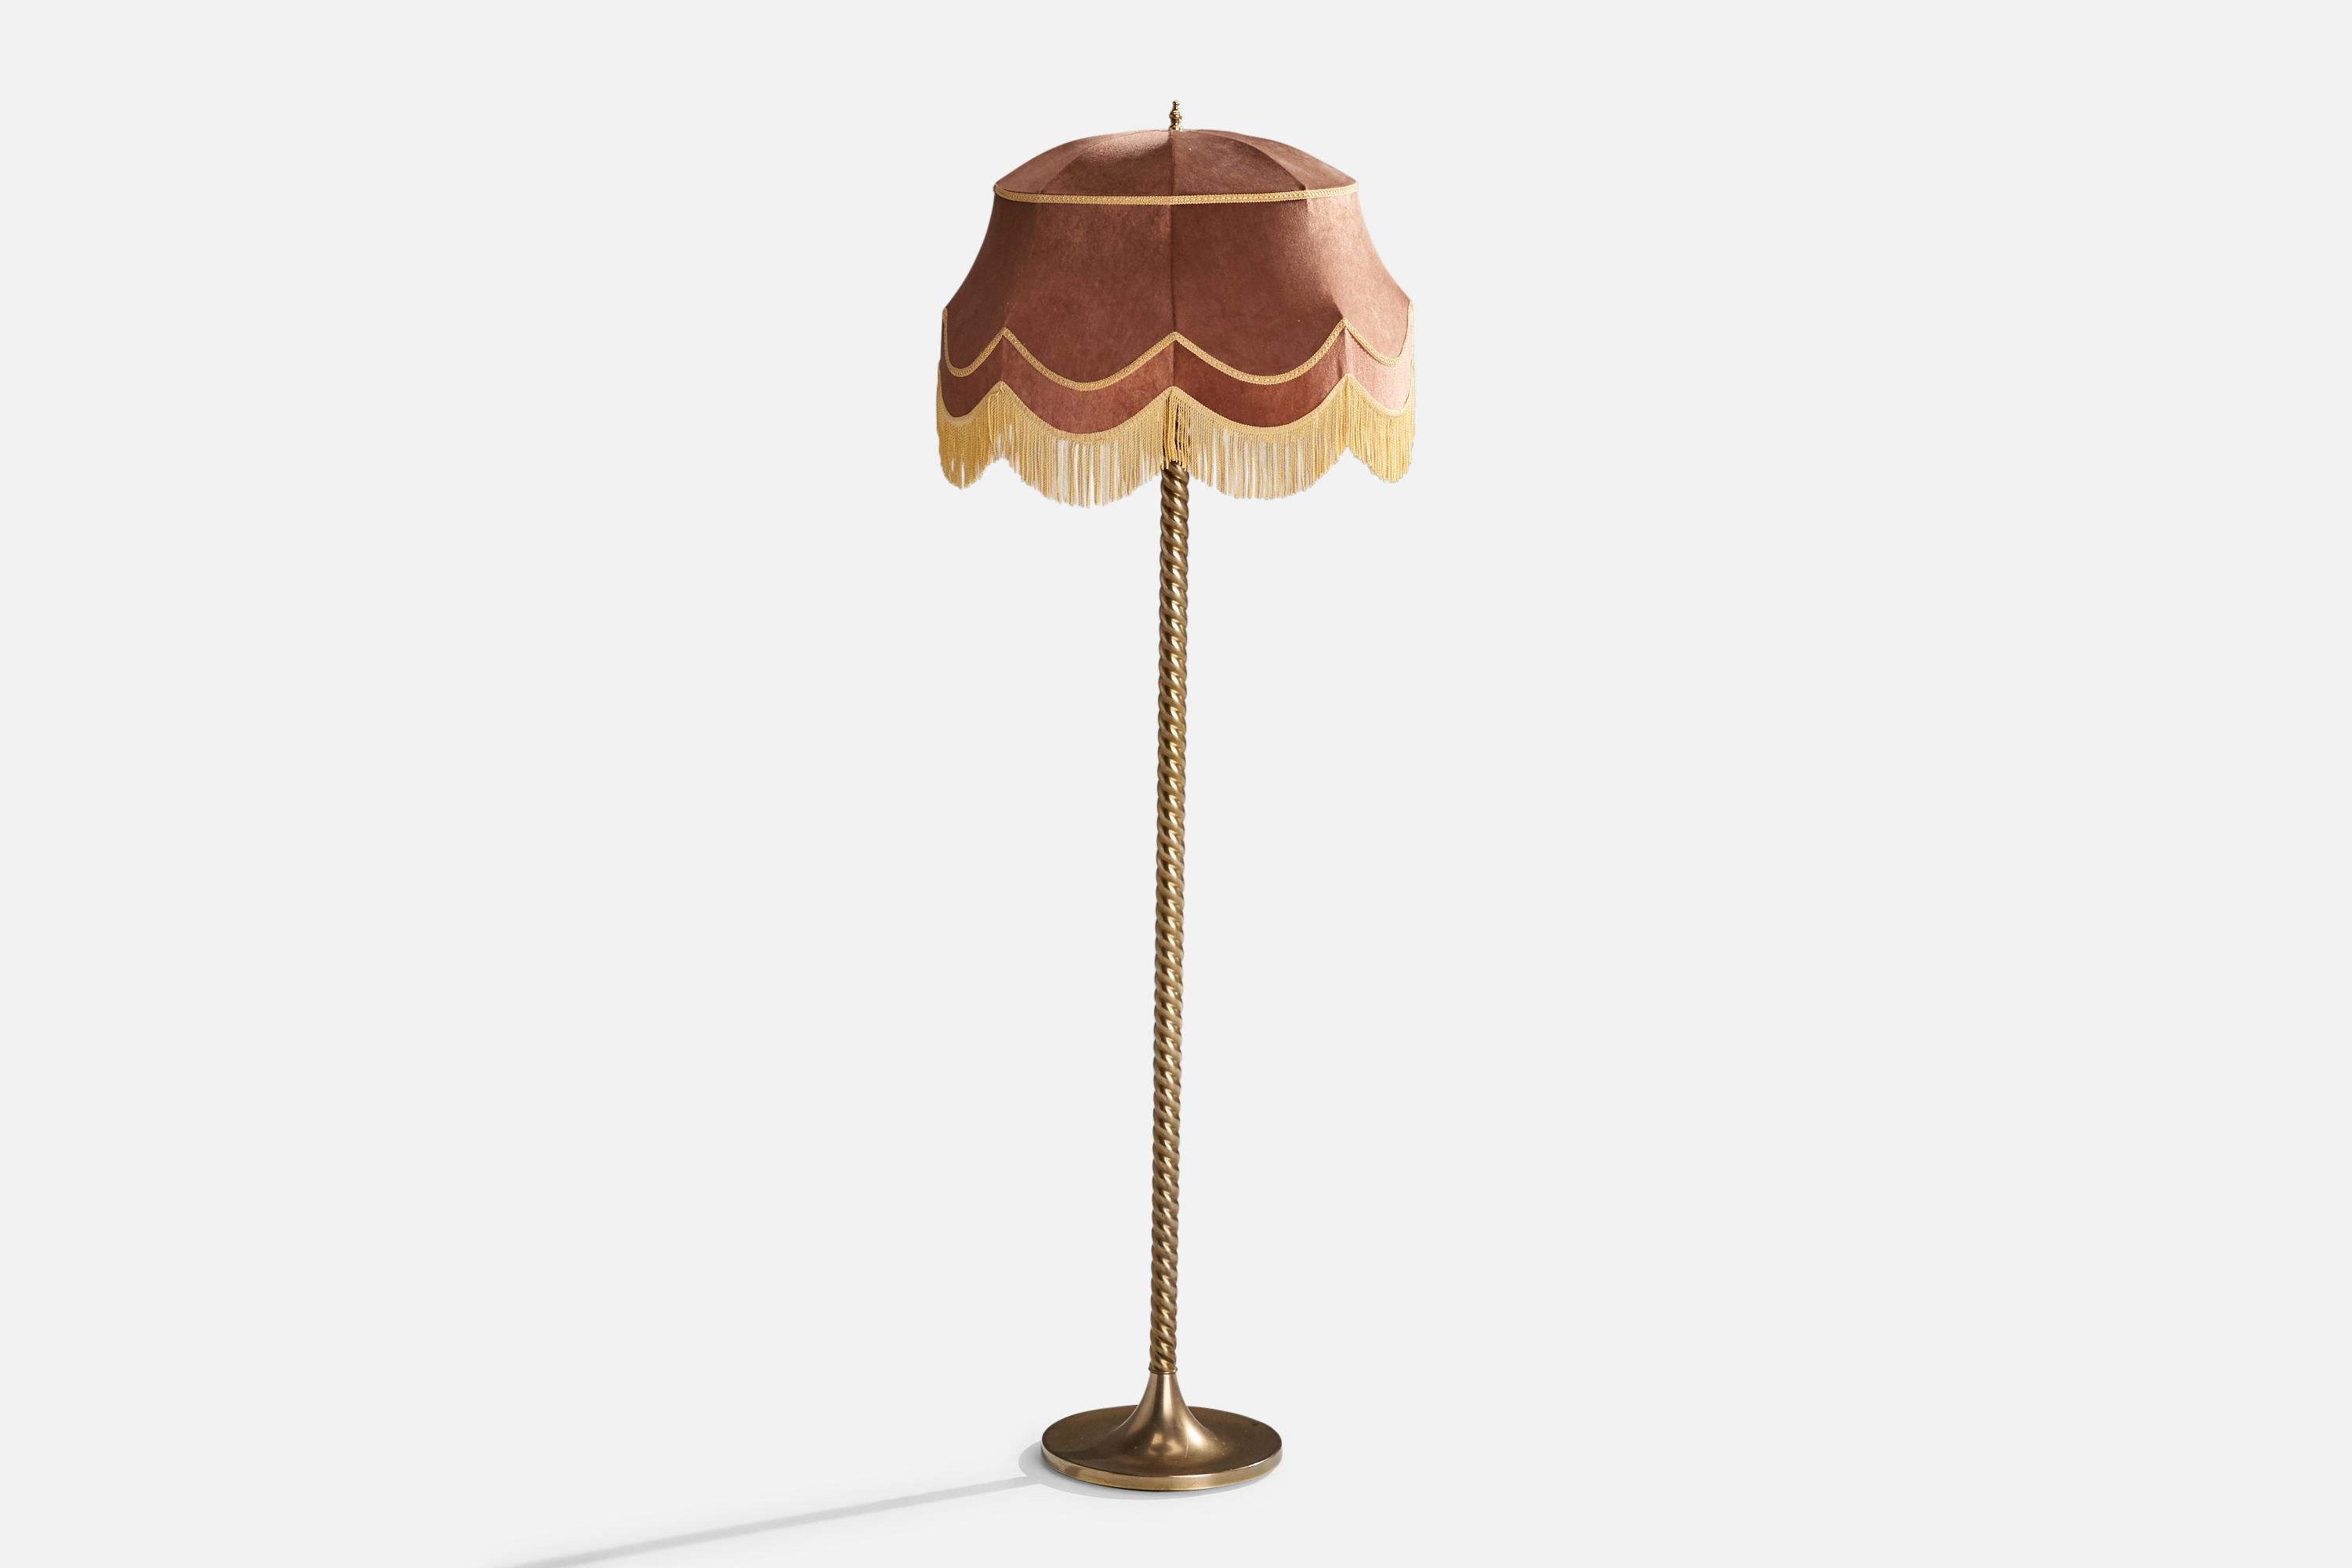 A brass, pink velvet and beige string fabric floor lamp designed and produced by Tranås Stilarmatur, Sweden, c. 1970s.

Vintage lampshade in fair condition.

Overall Dimensions (inches): 59.5” H x 19.25” W x 19.25” D
Stated dimensions include